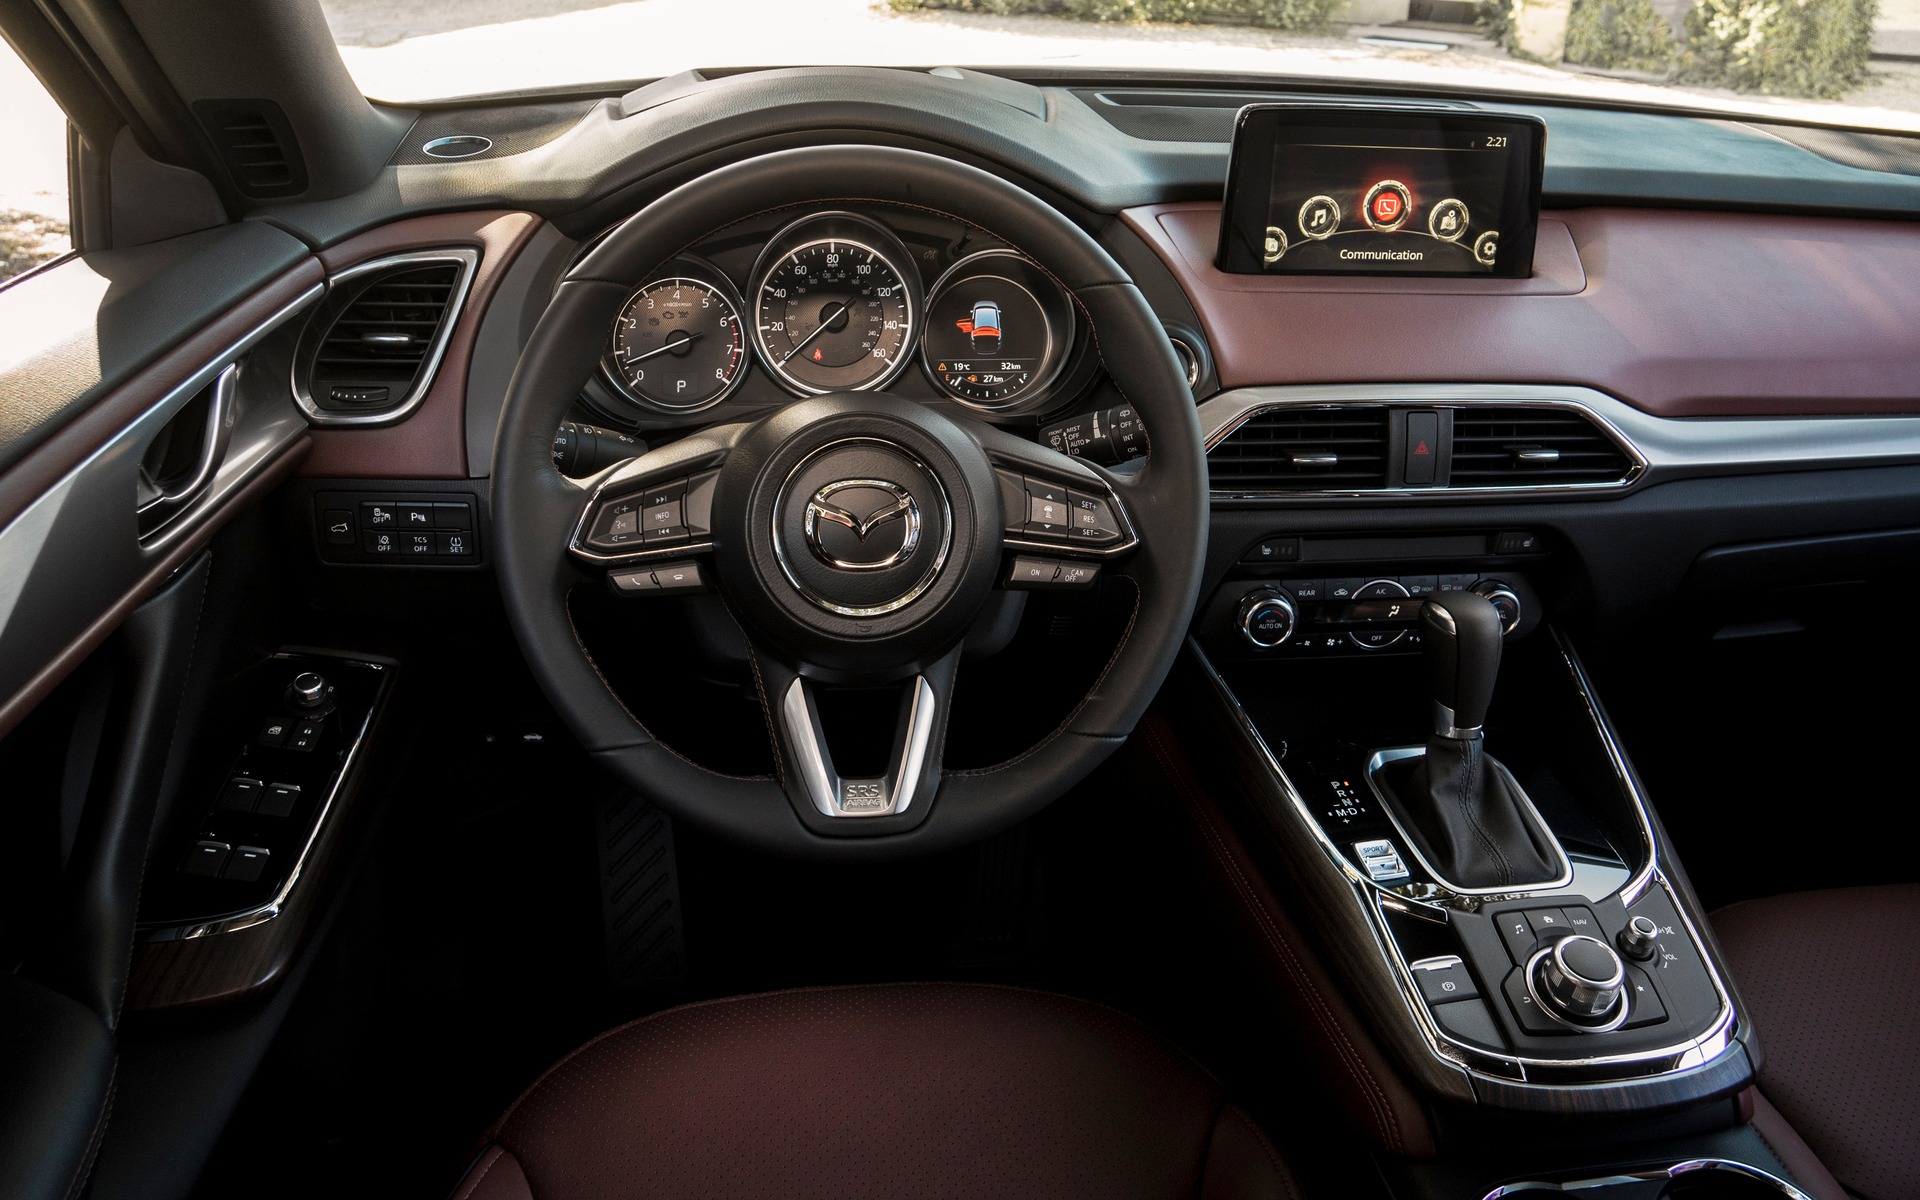 The 2016 Mazda CX-9's dashboard is angled towards the driver.